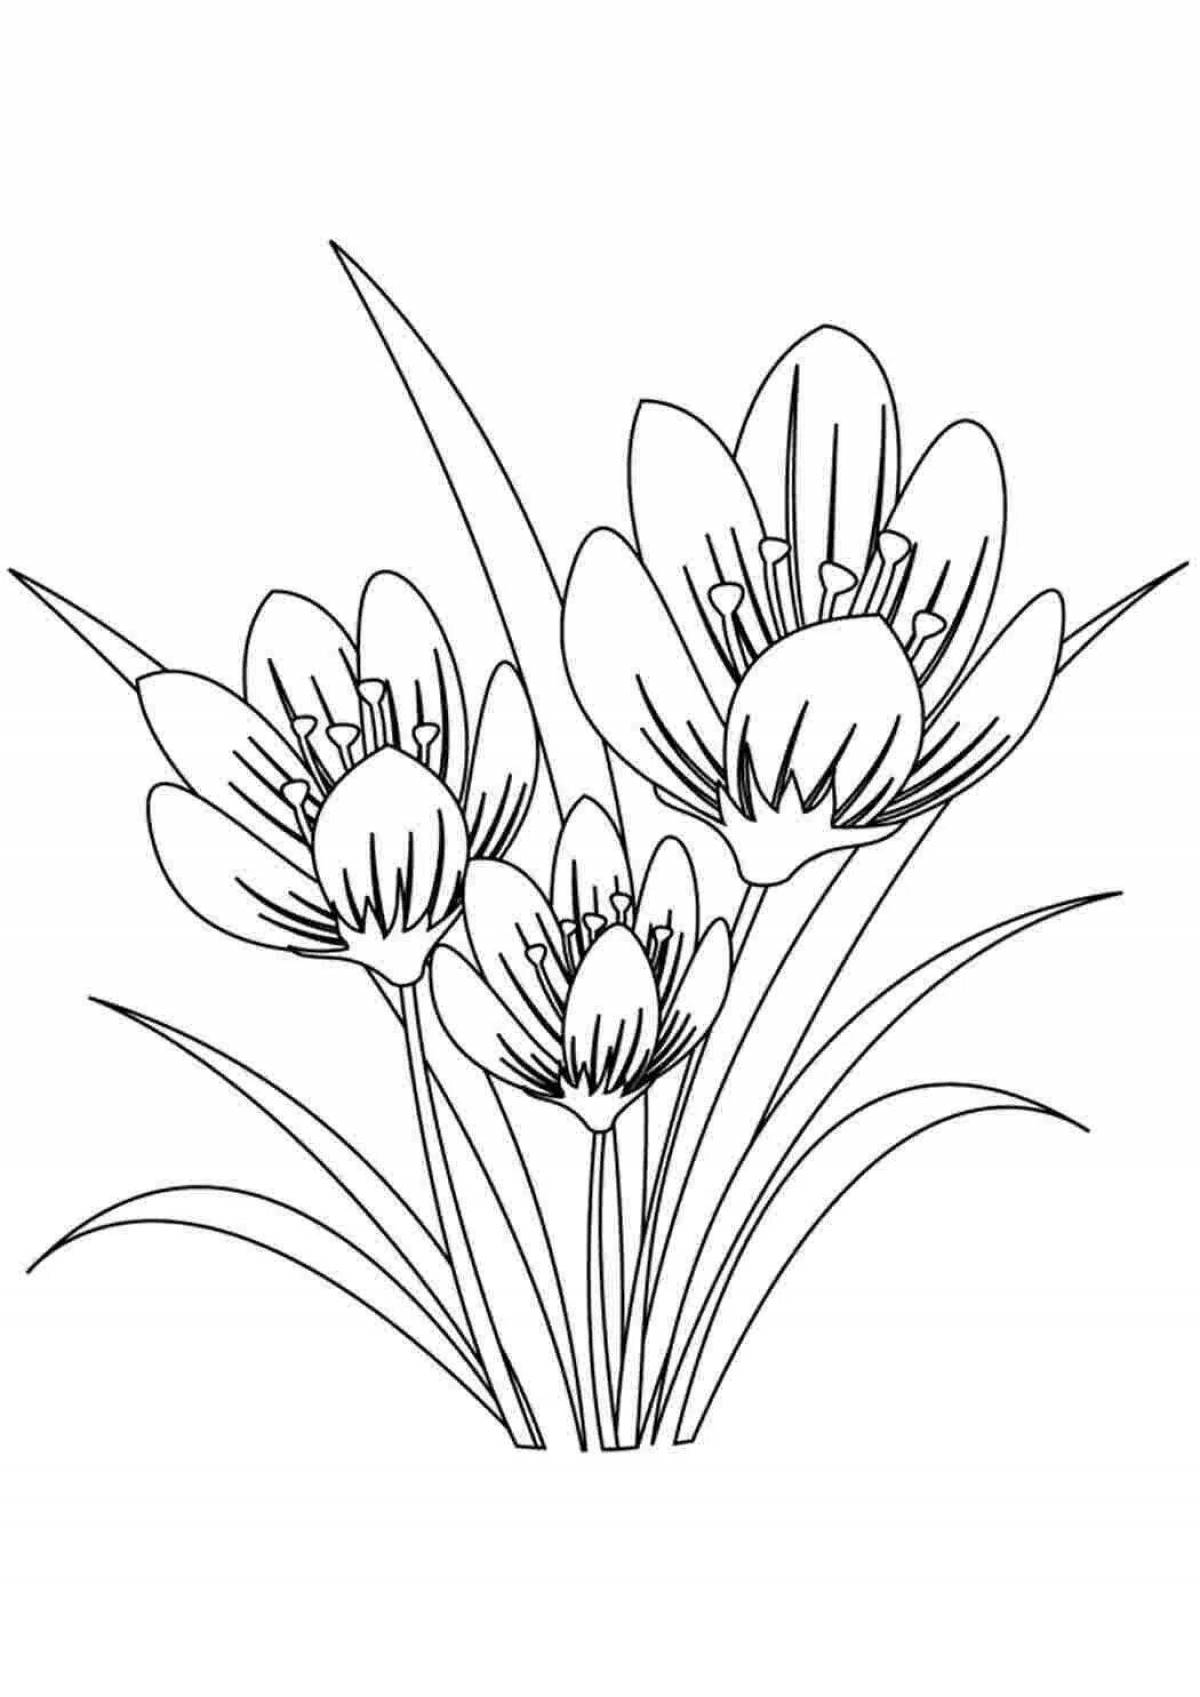 Fancy azure flower coloring page